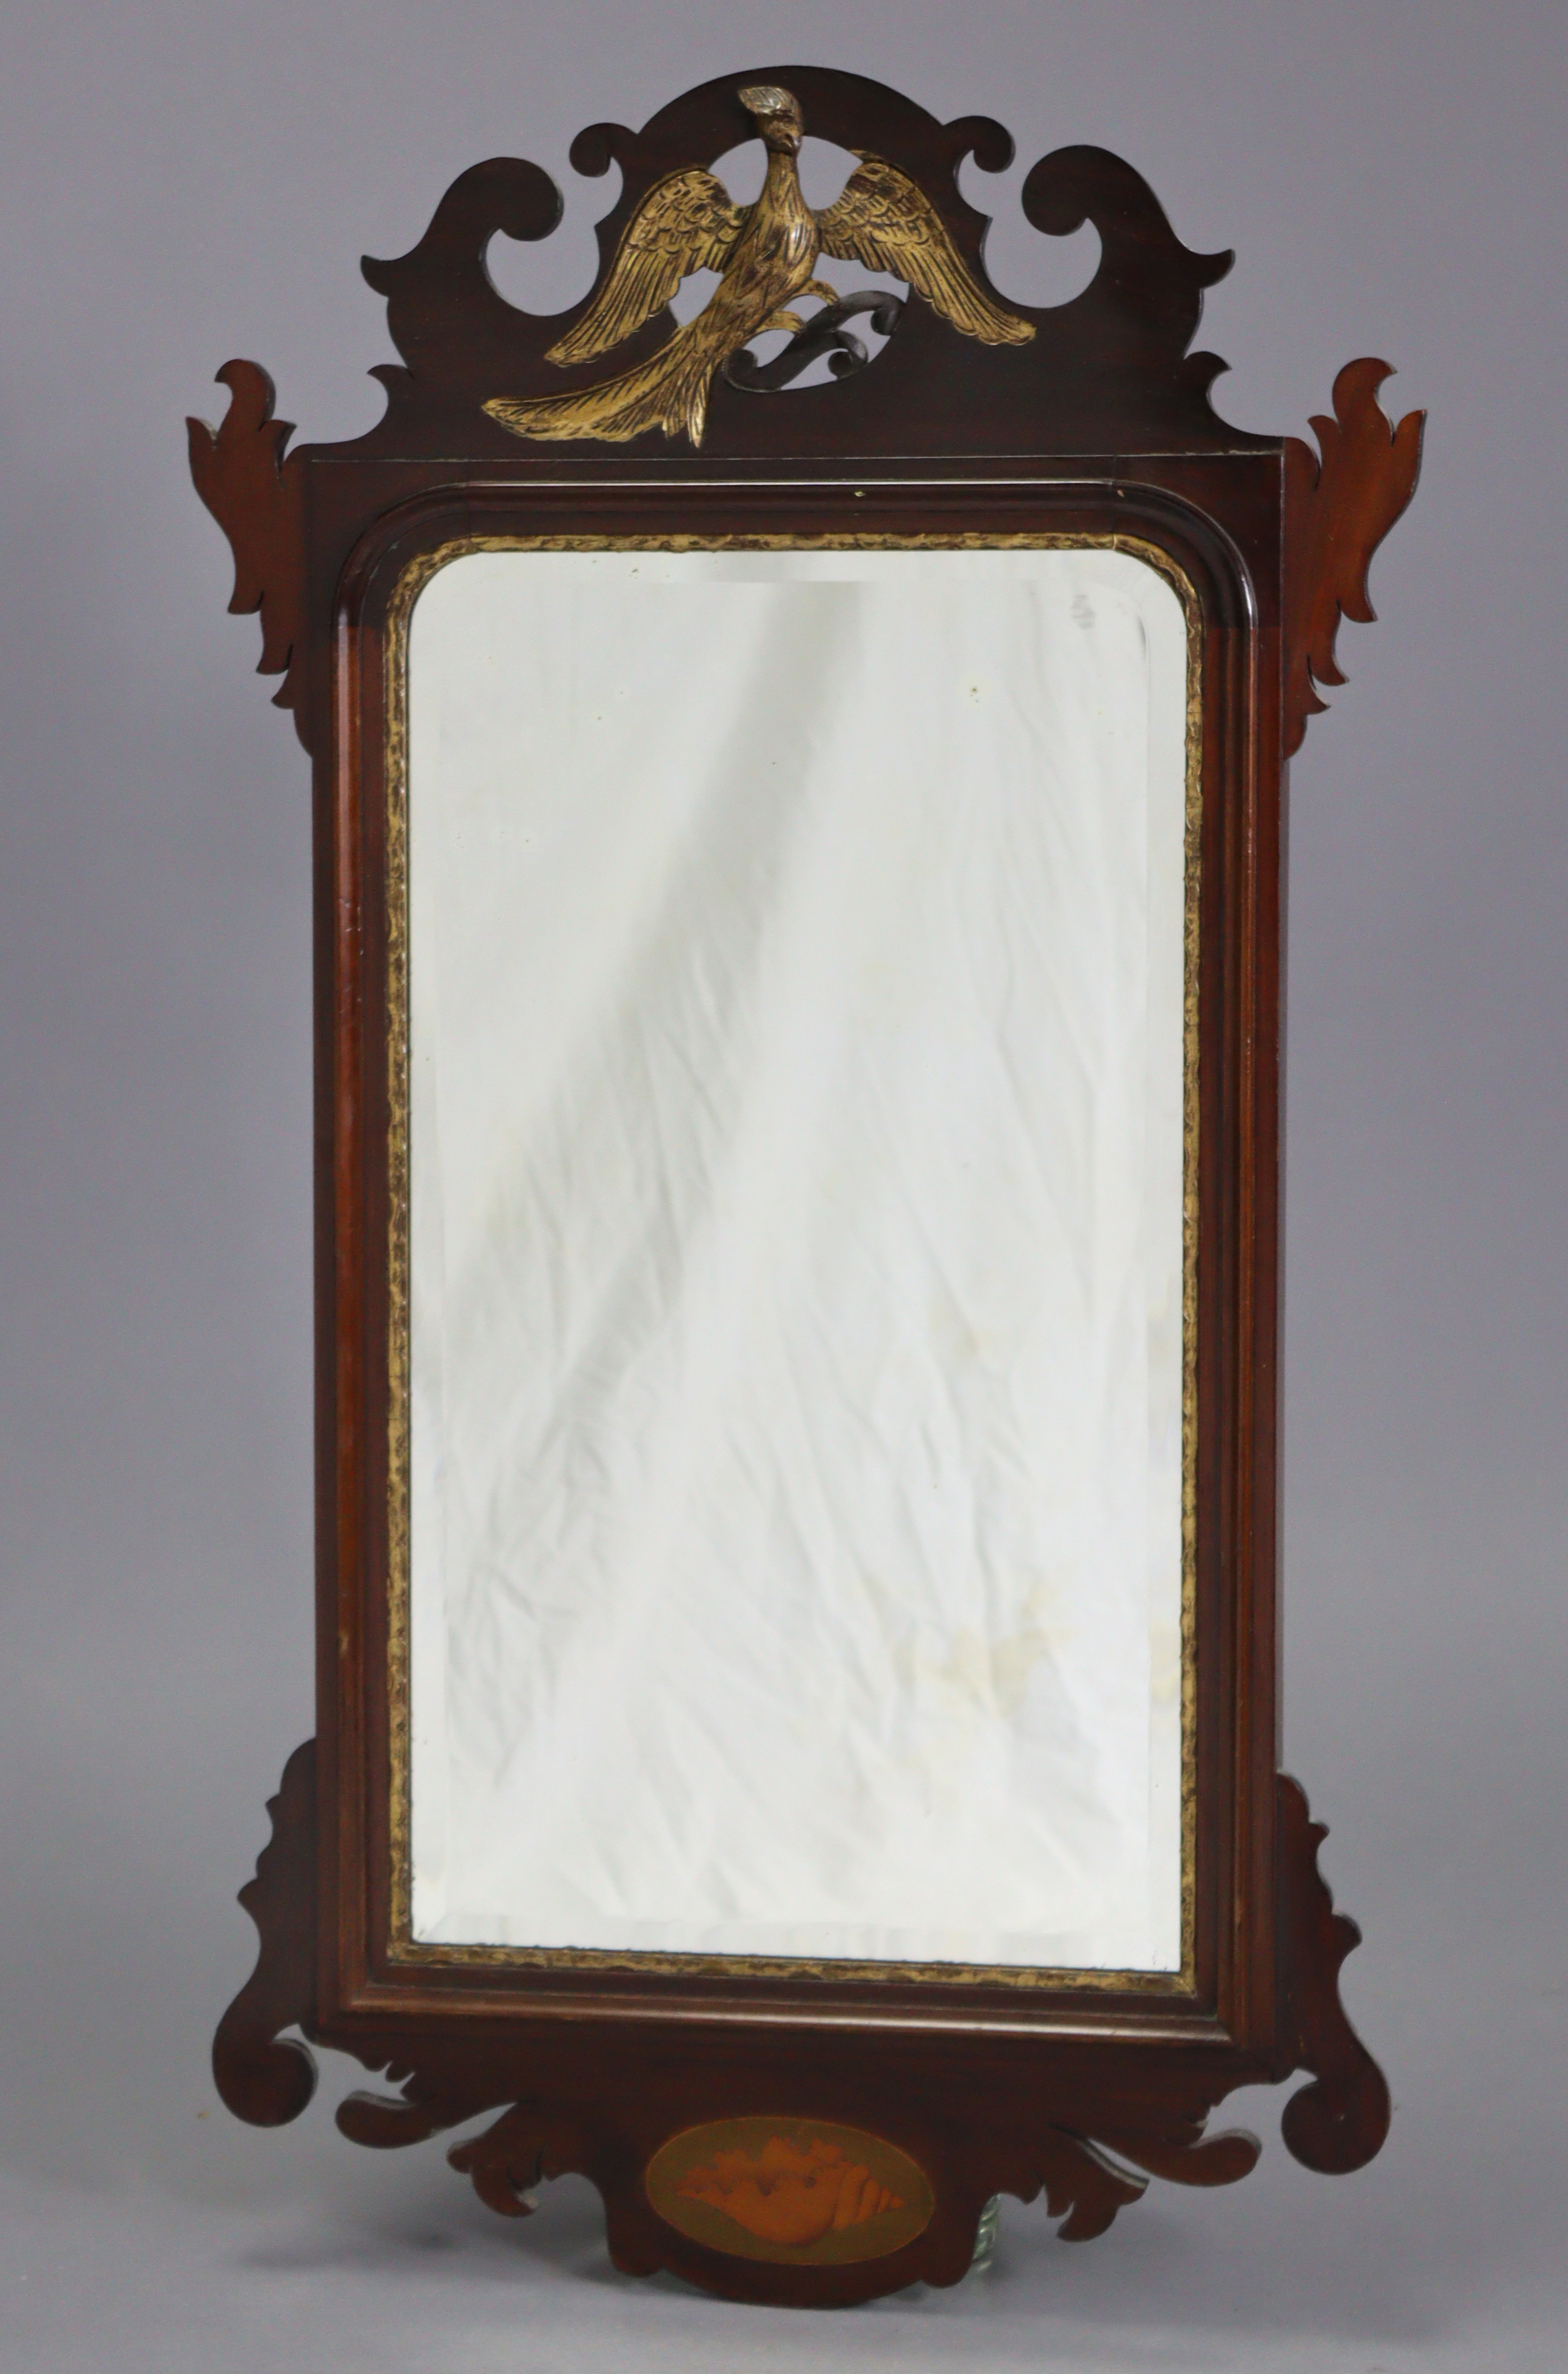 A George II-style rectangular wall mirror in fret-carved mahogany veneered frame with gilt ho-ho